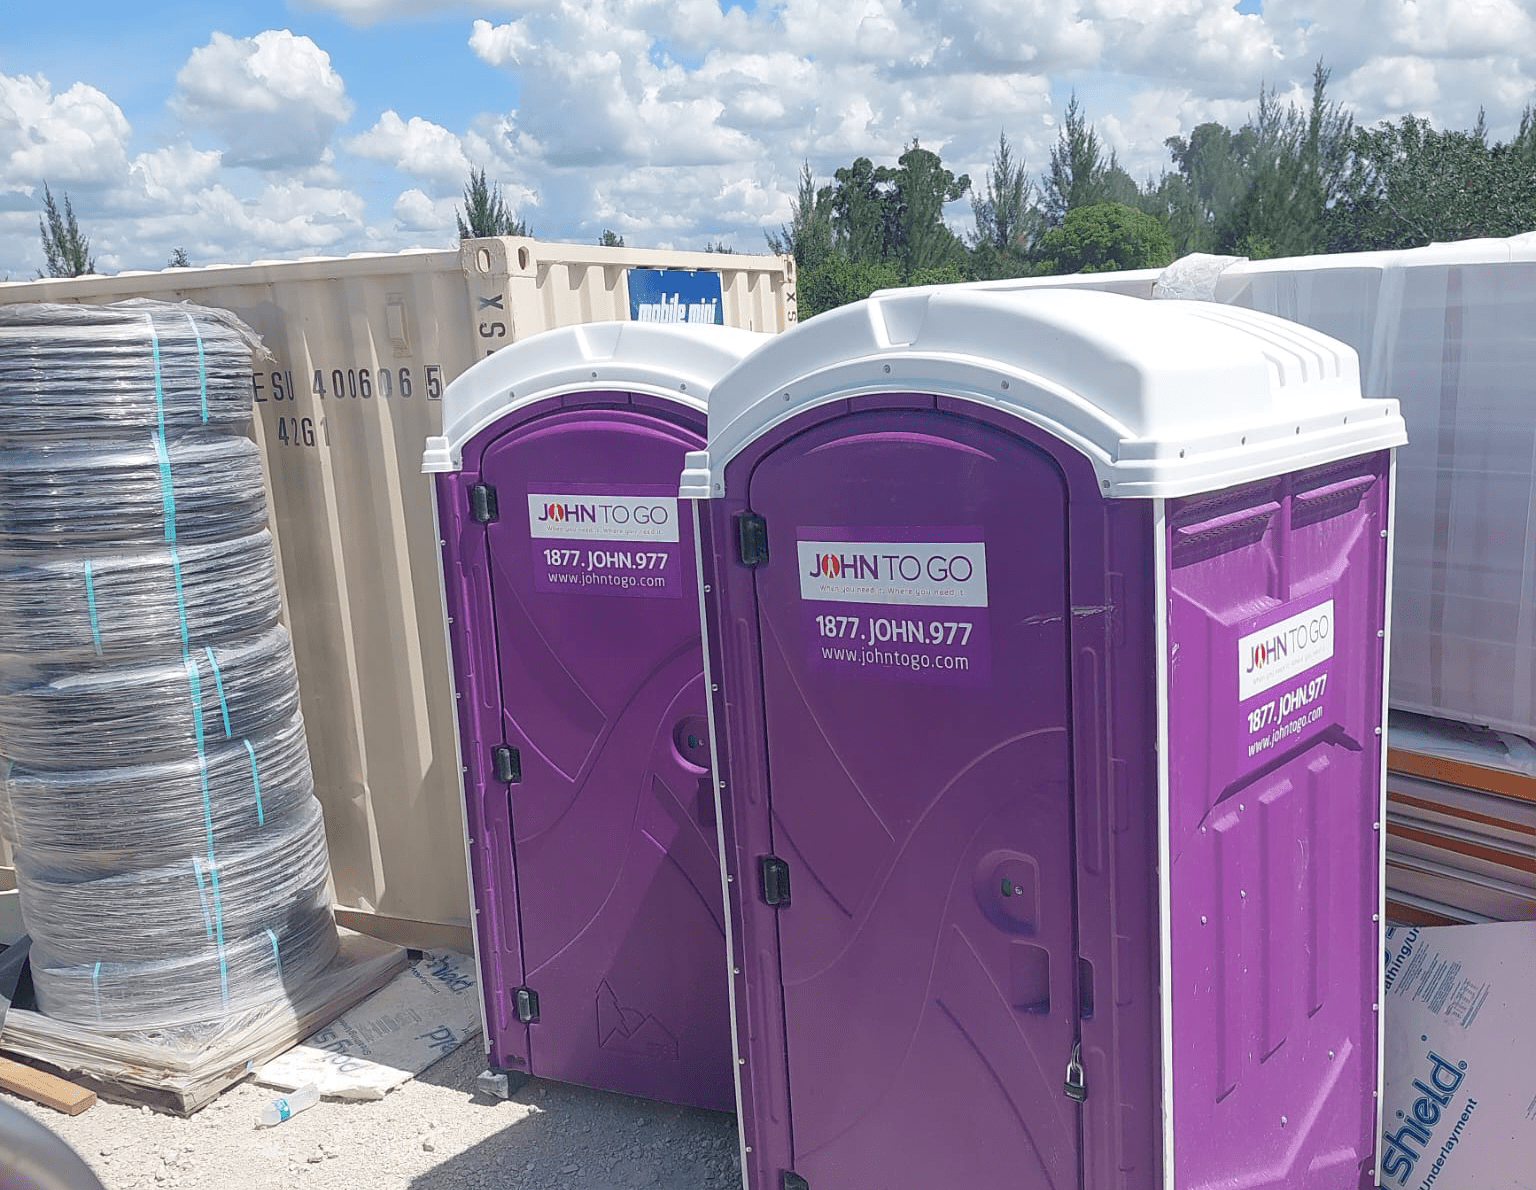 porta potties positioned at construction site